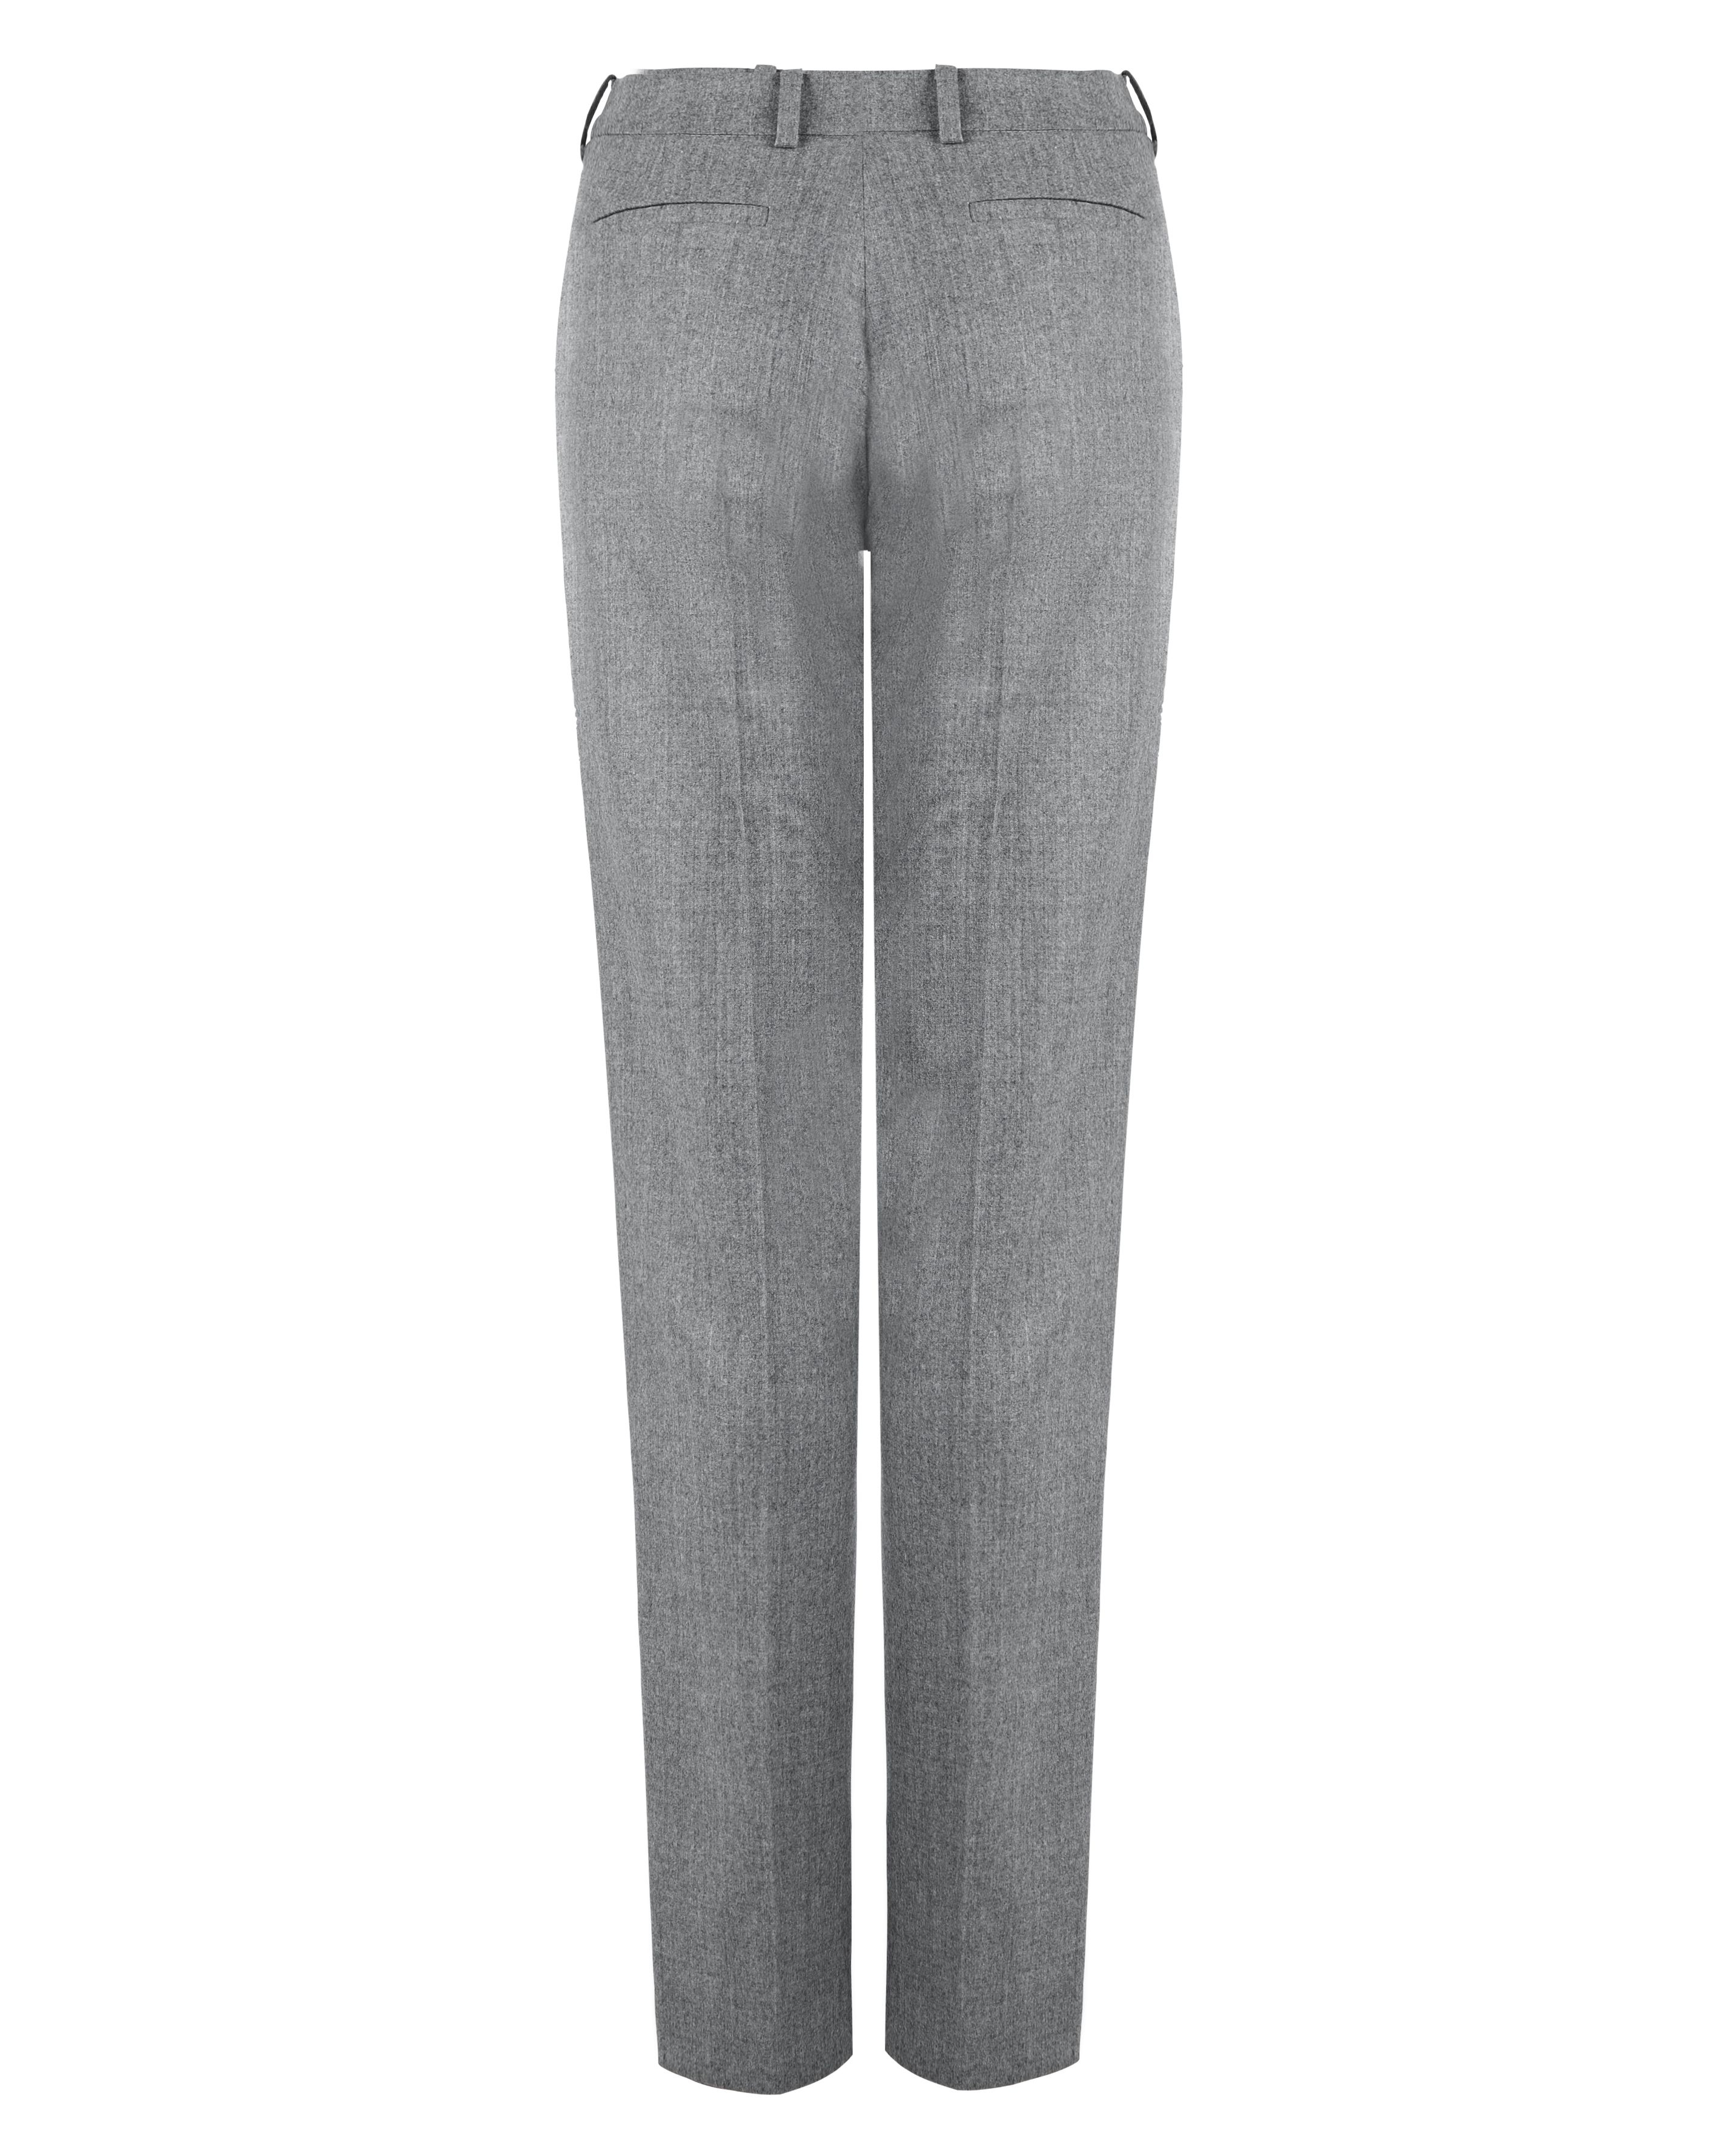 Jaeger Wool Flannel Classic Trousers in Gray (Grey) | Lyst